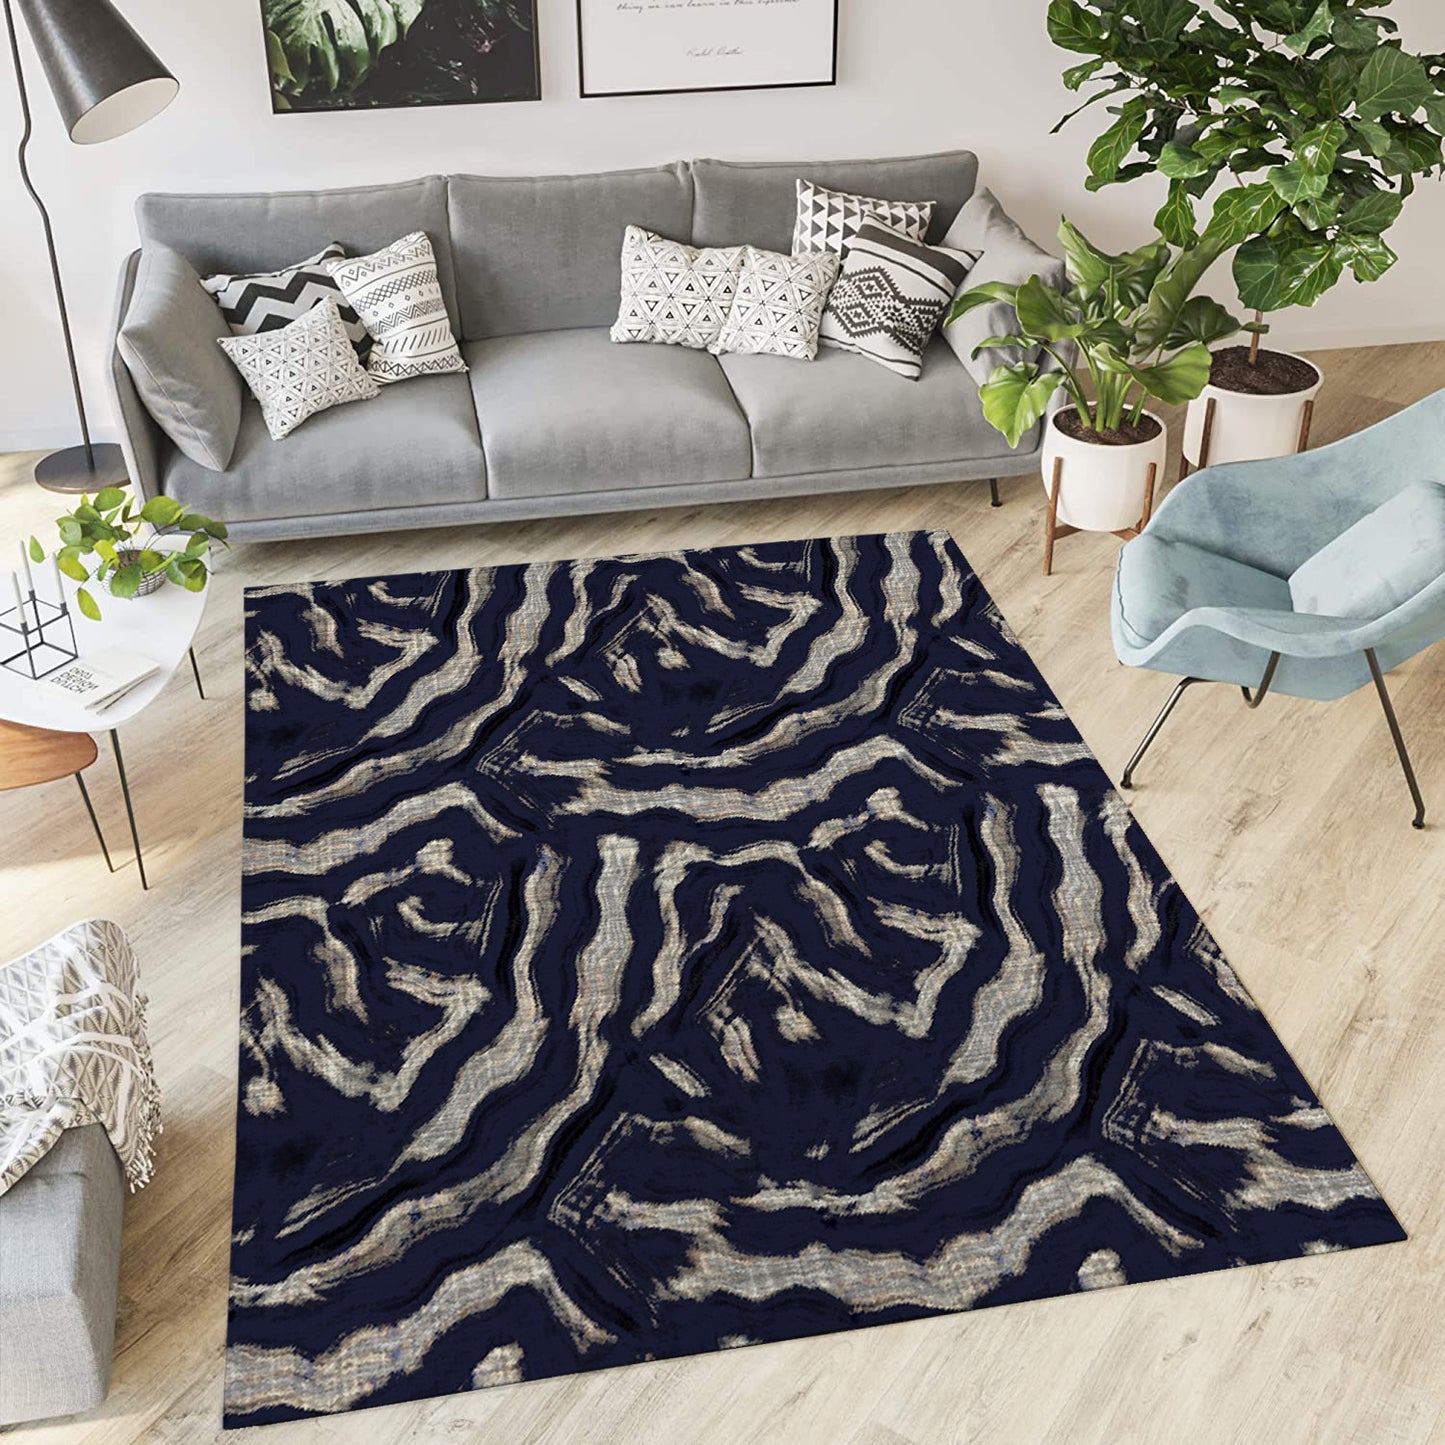 Artsy Low Pile Area Rug